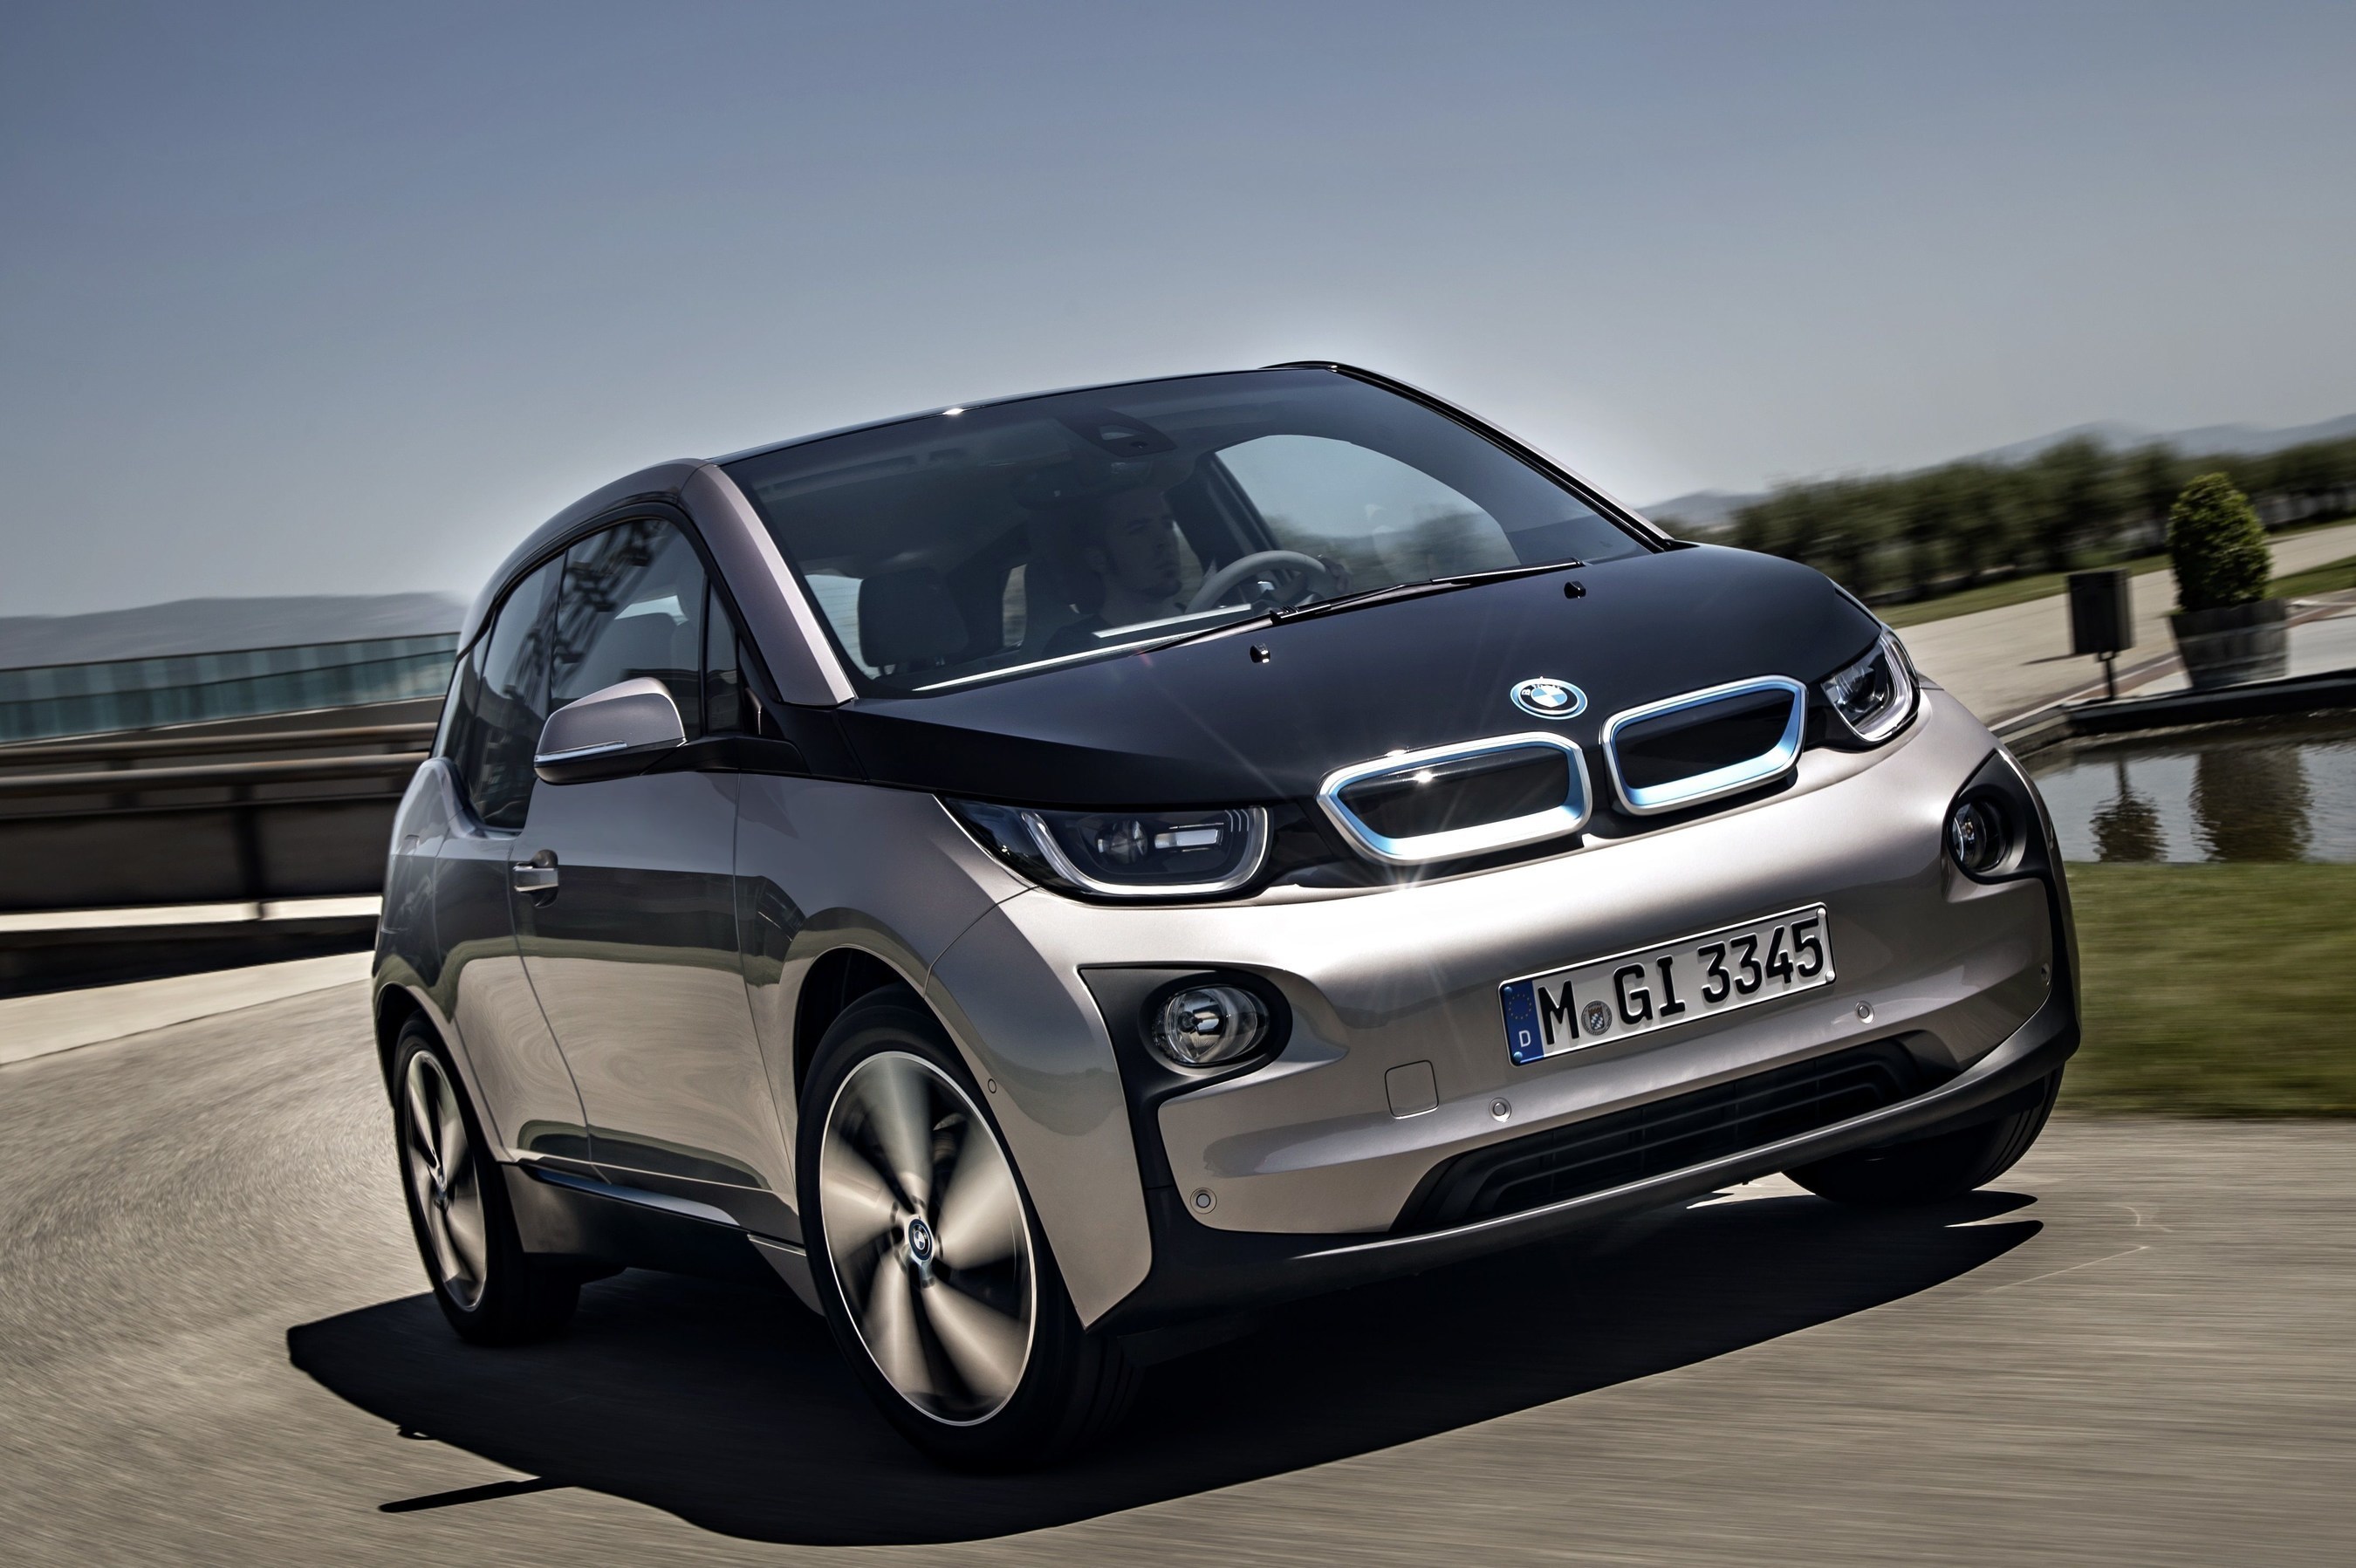 BMW i3: More than 3,000 vehicles sold in September 2015 (PRNewsFoto/BMW Group) (PRNewsFoto/BMW Group)